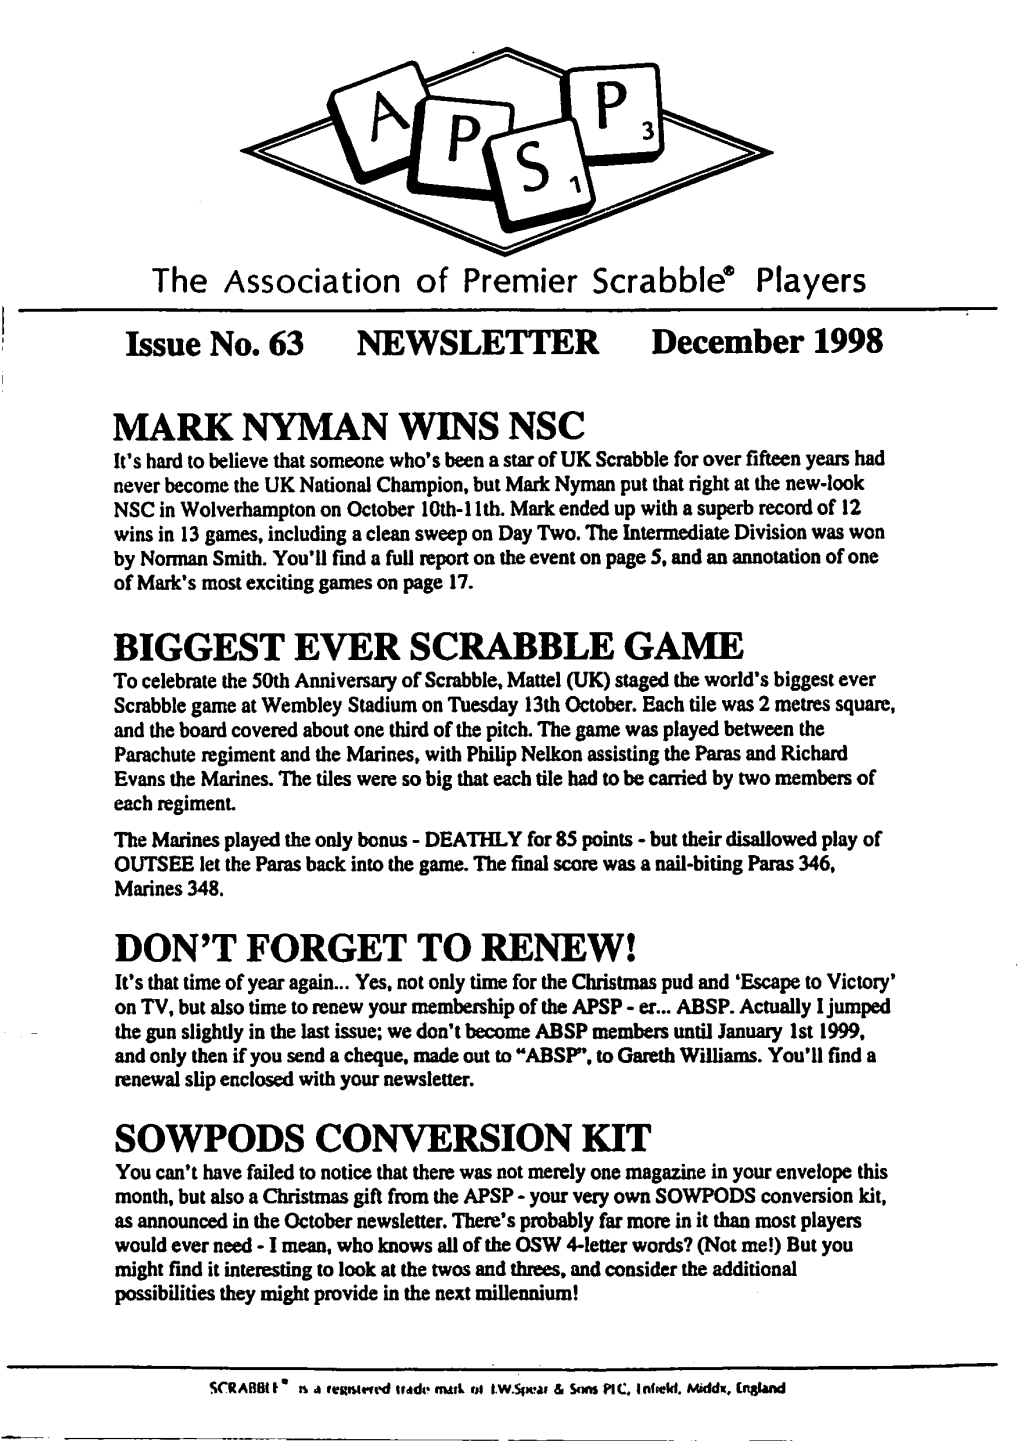 Mark Nyman Wins Nsc Don't Forget to Renew!